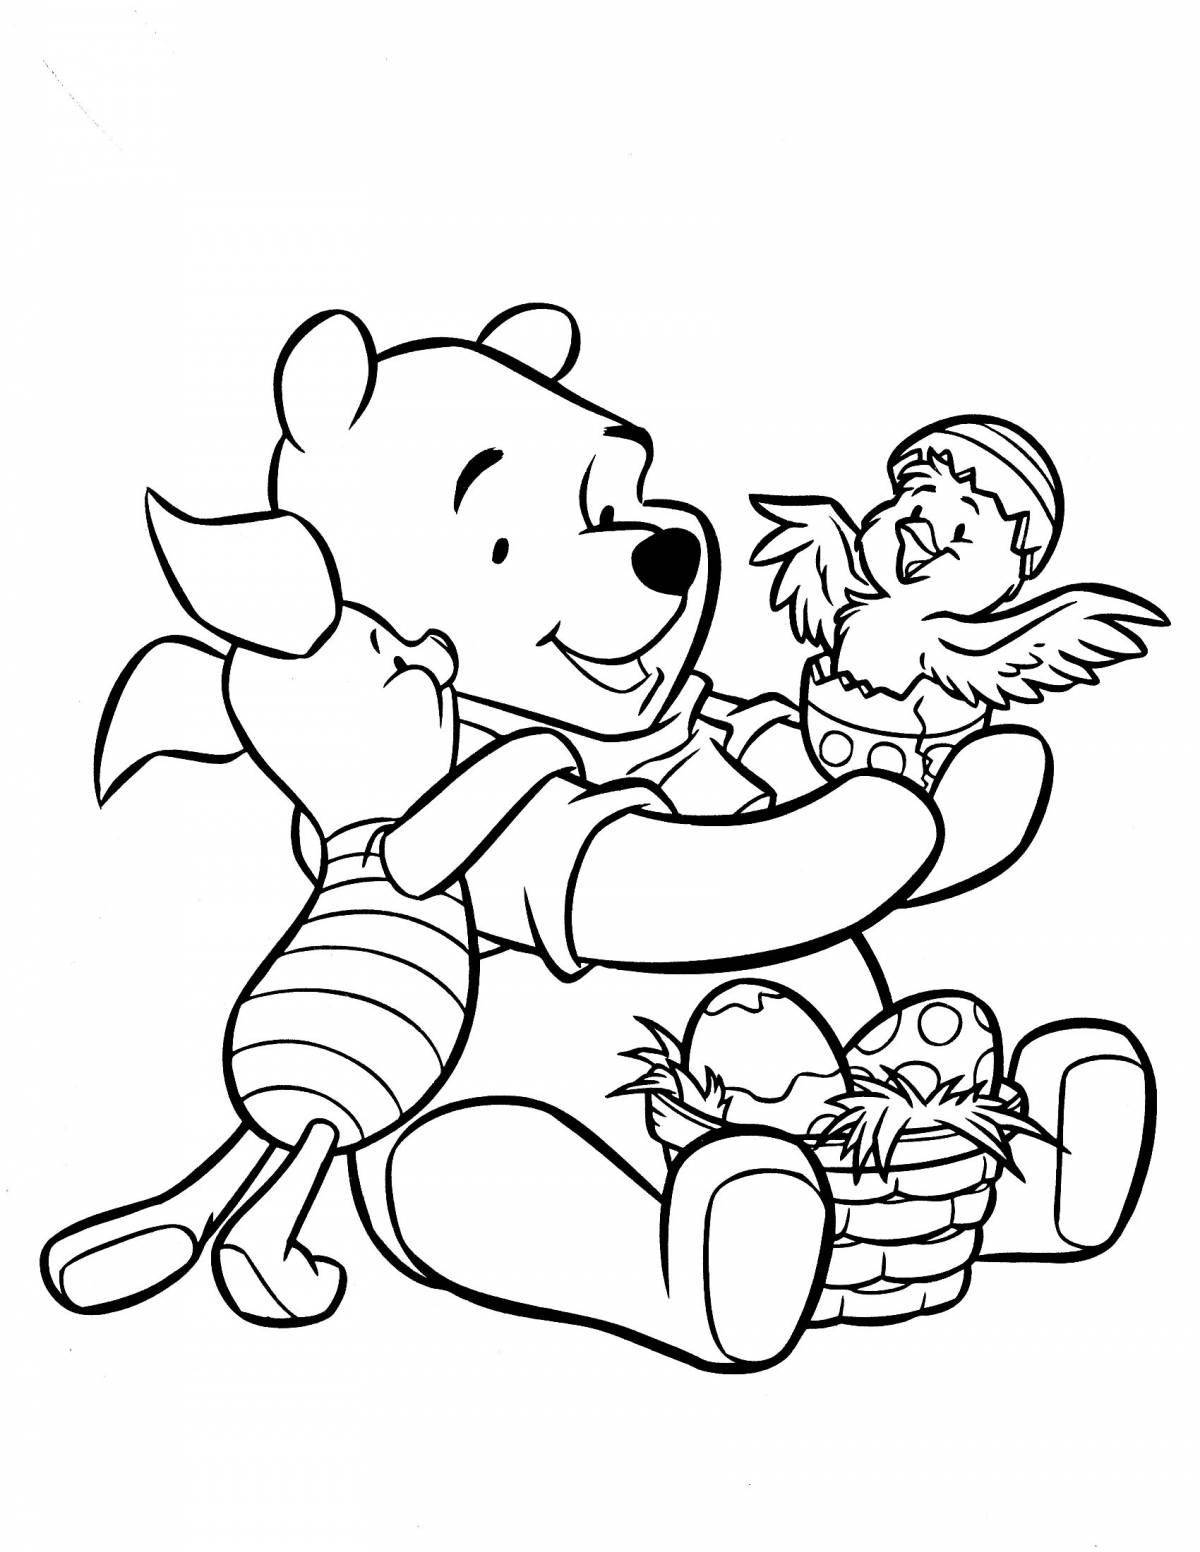 Coloring funny winnie the pooh